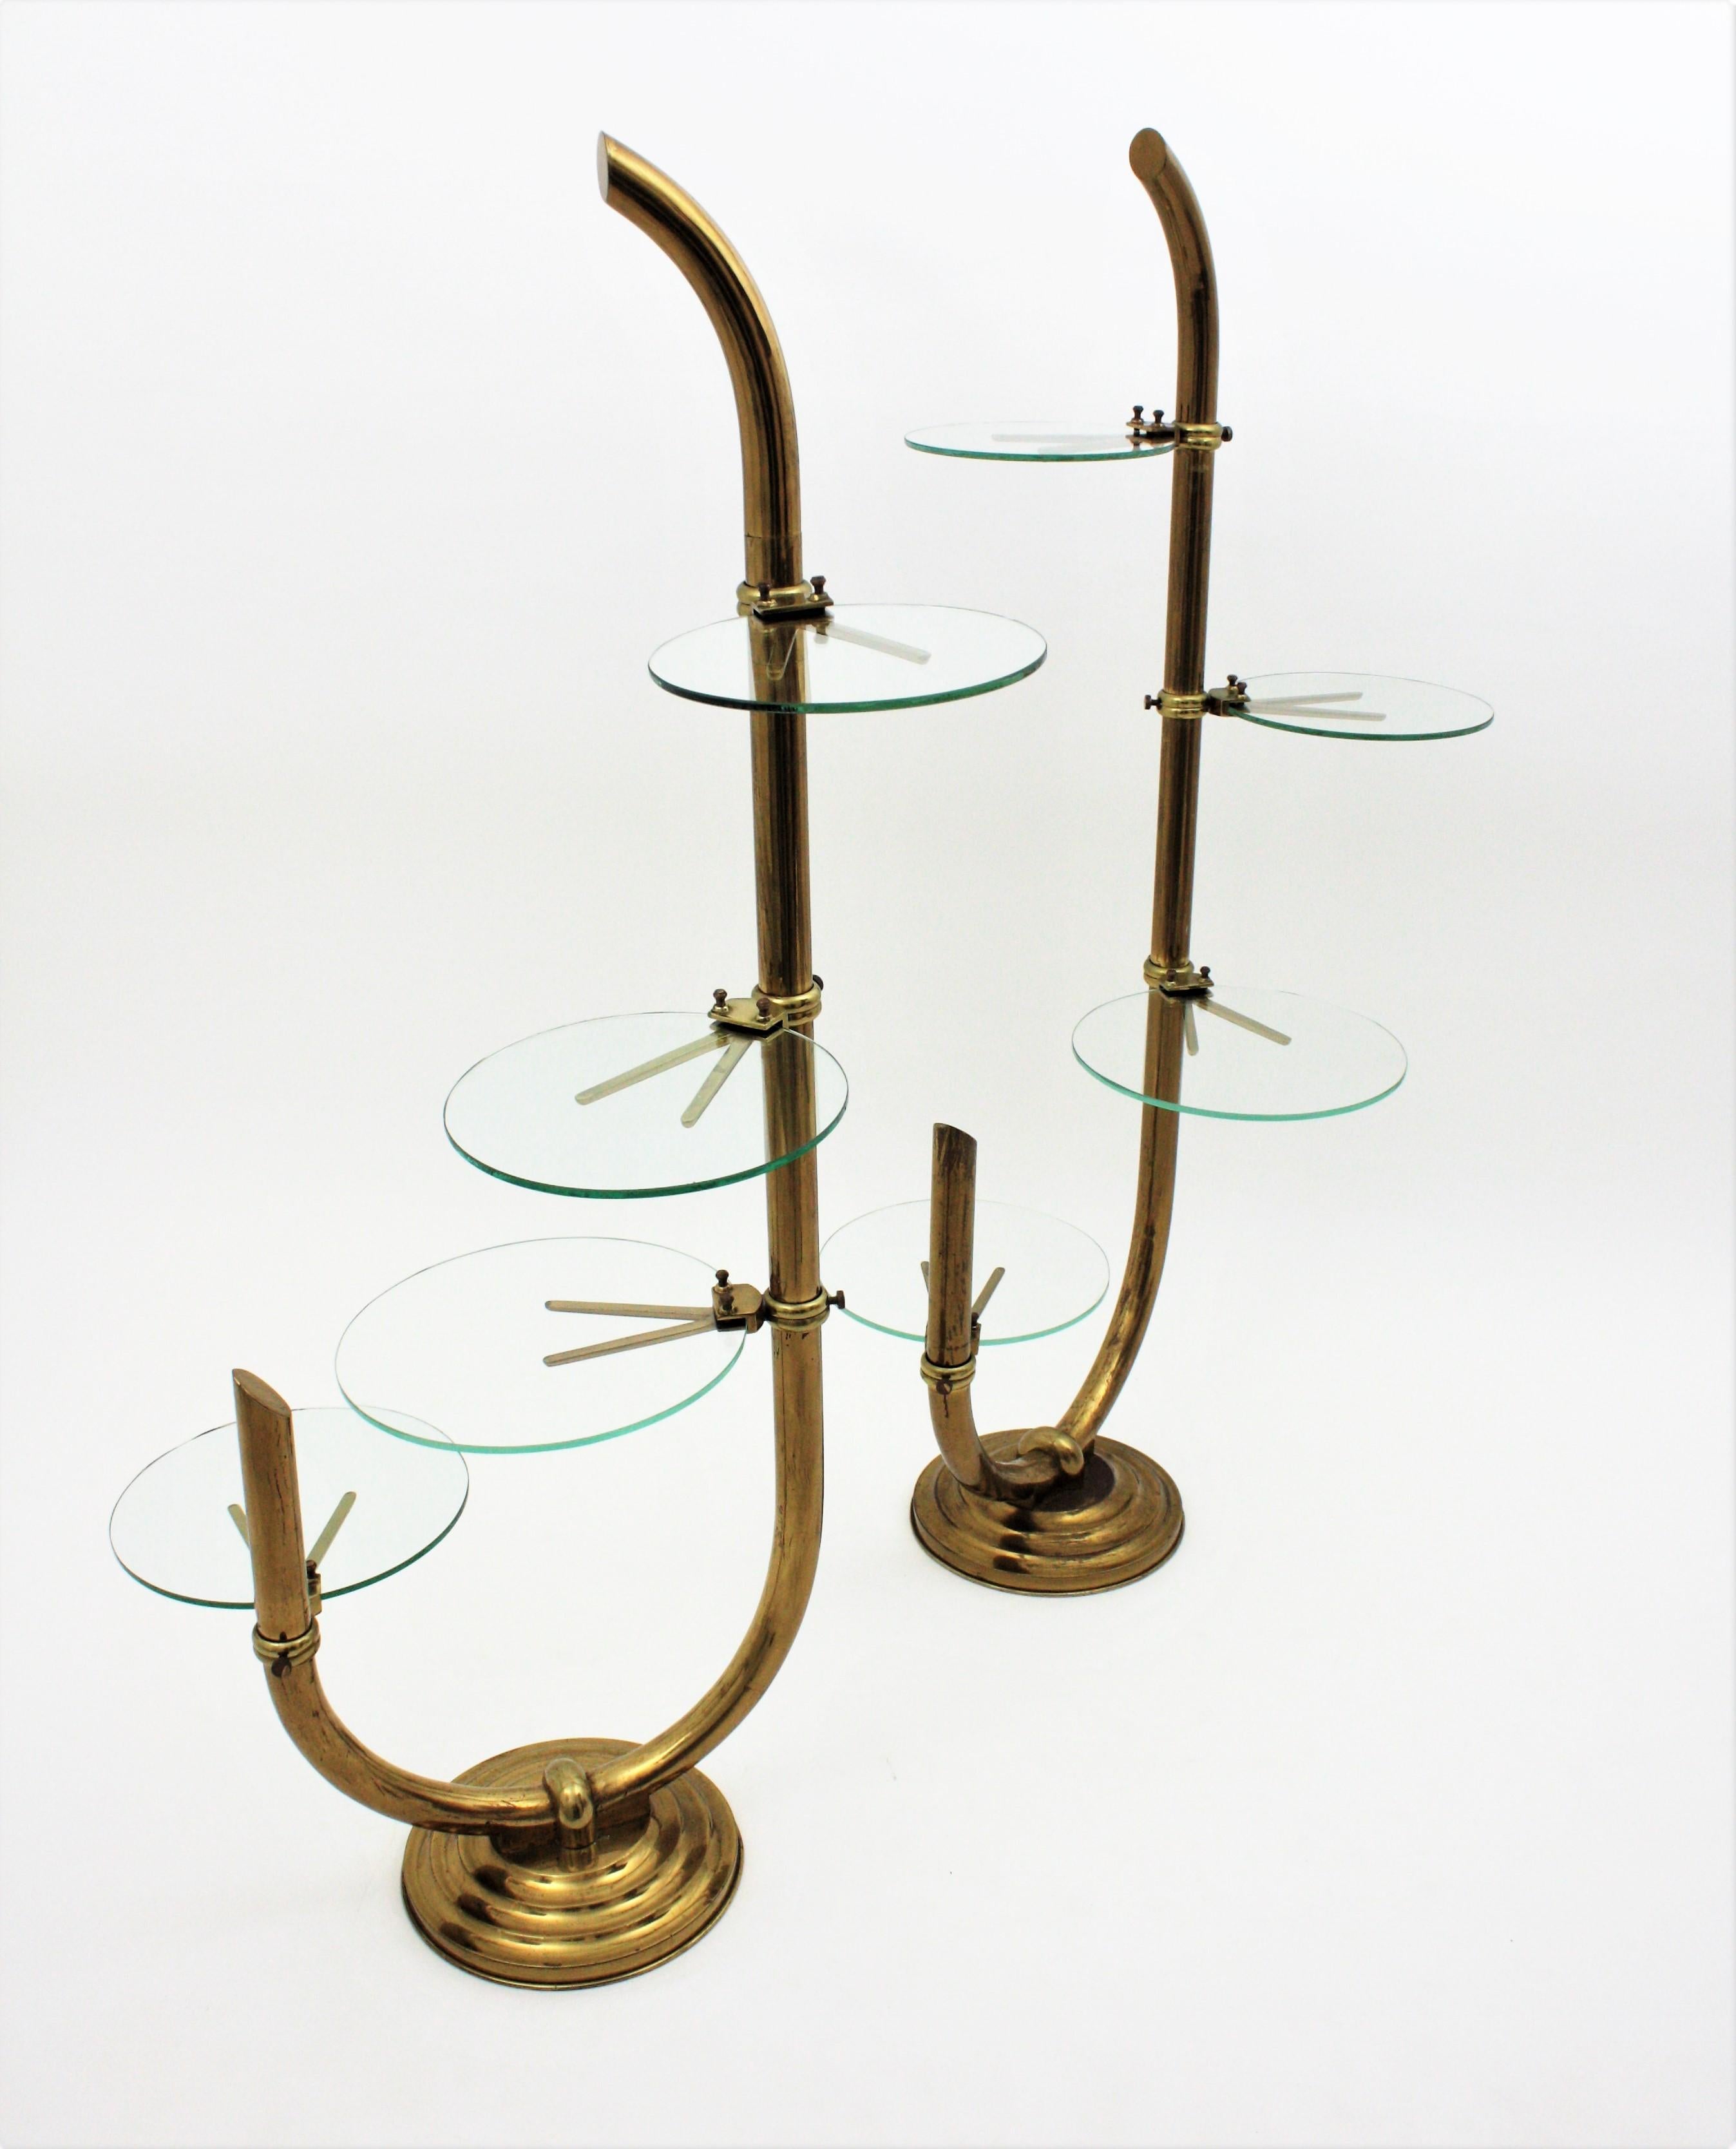 Art Deco Brass Floor Shop Display Stands / Swivel Etageres with Shelves in Glass 5